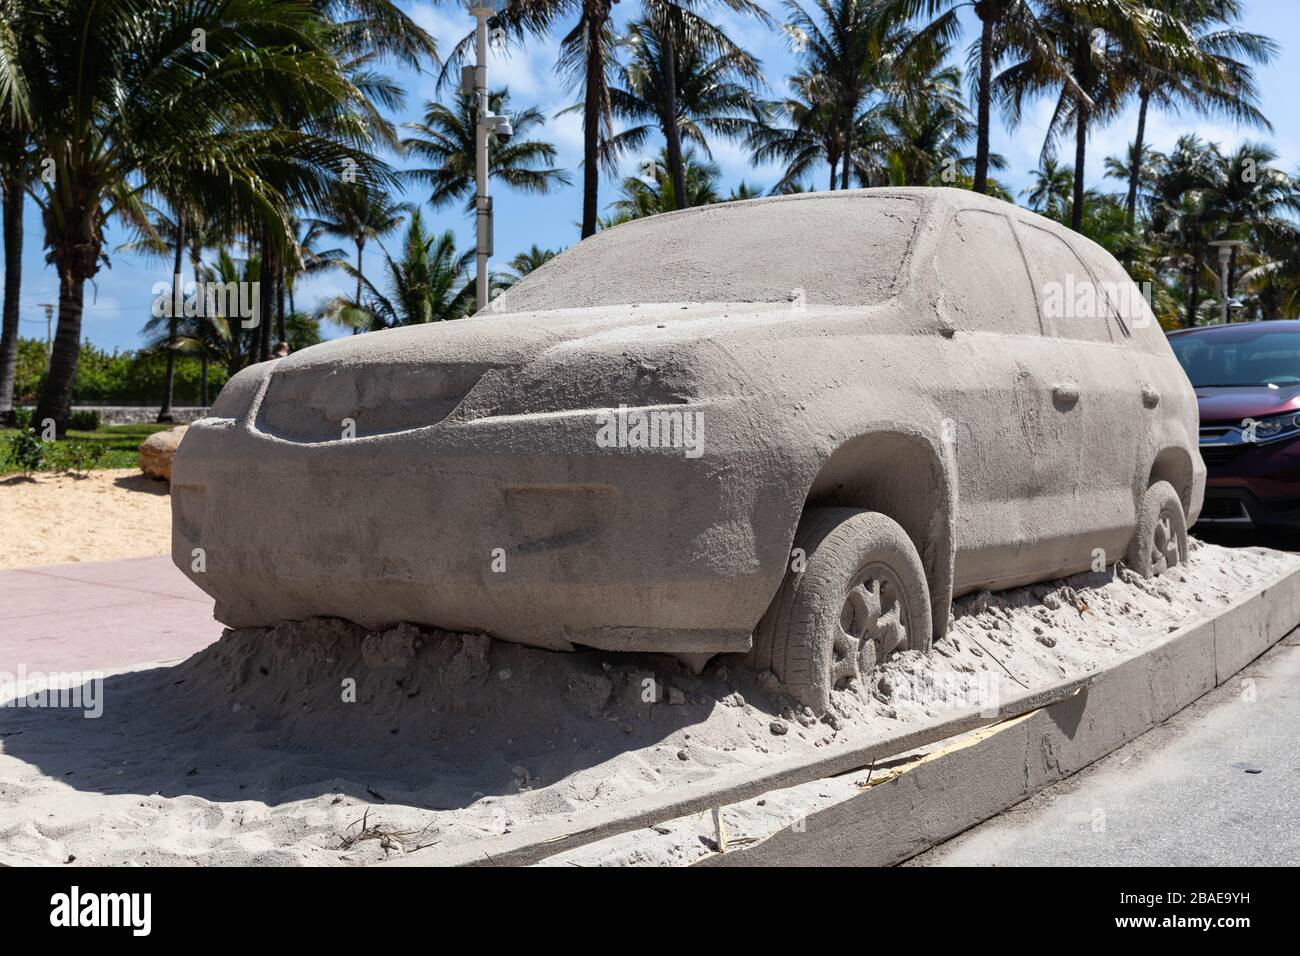 A three quarter front view of a life-size sand car in a sandpit, South Beach, Miami Beach, Florida, US. Stock Photo